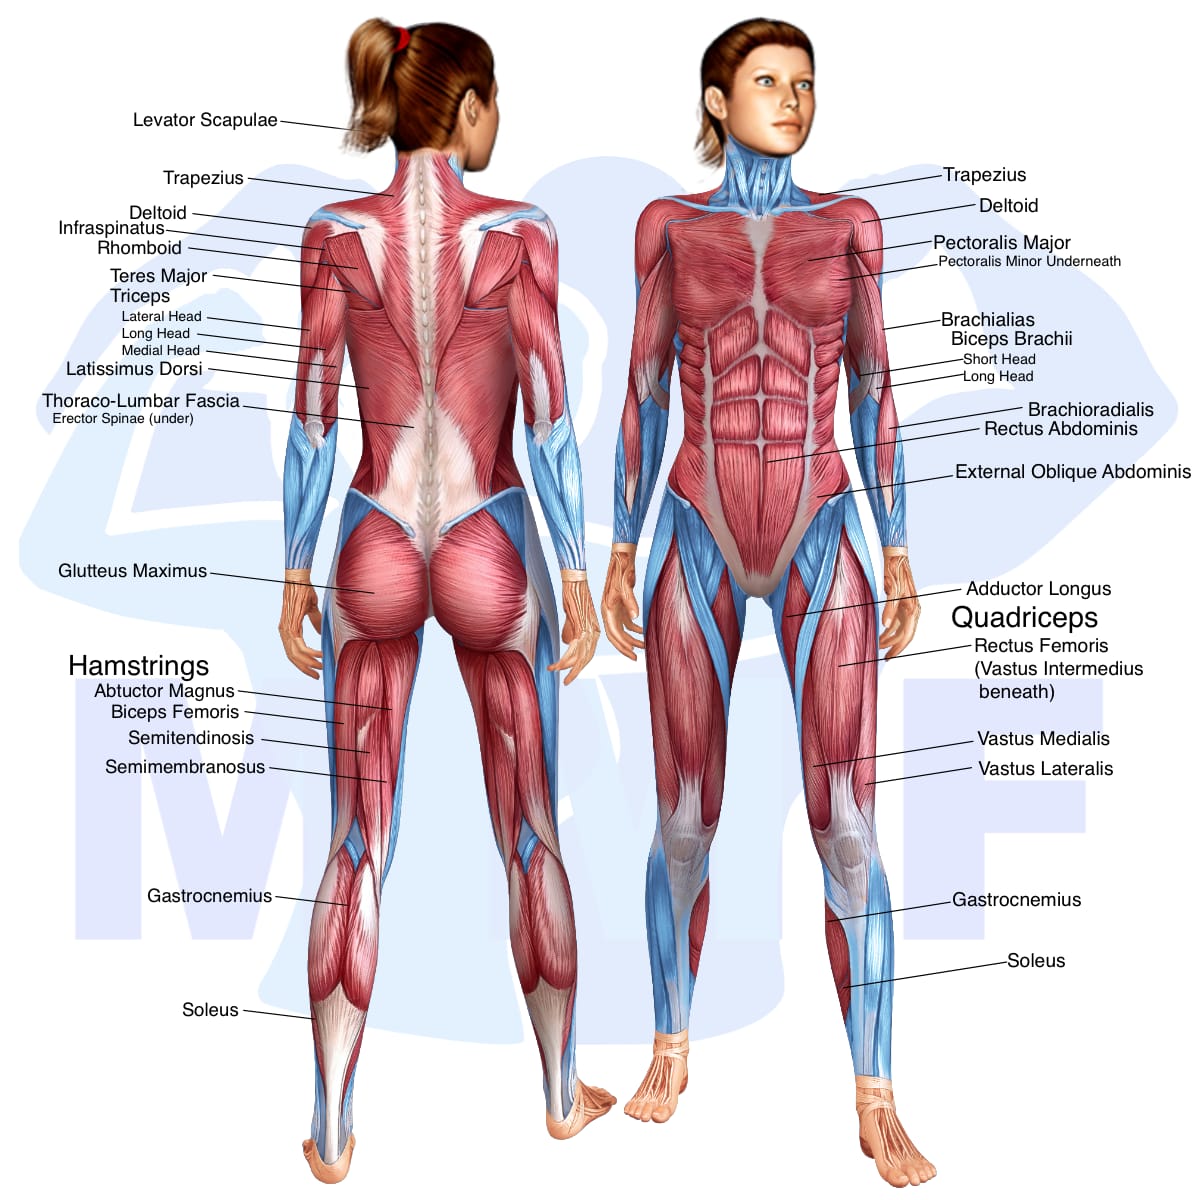 Image of the skeletal muscular system with the muscles used in the cable squat row exercise highlighted in red and the rest in blue.